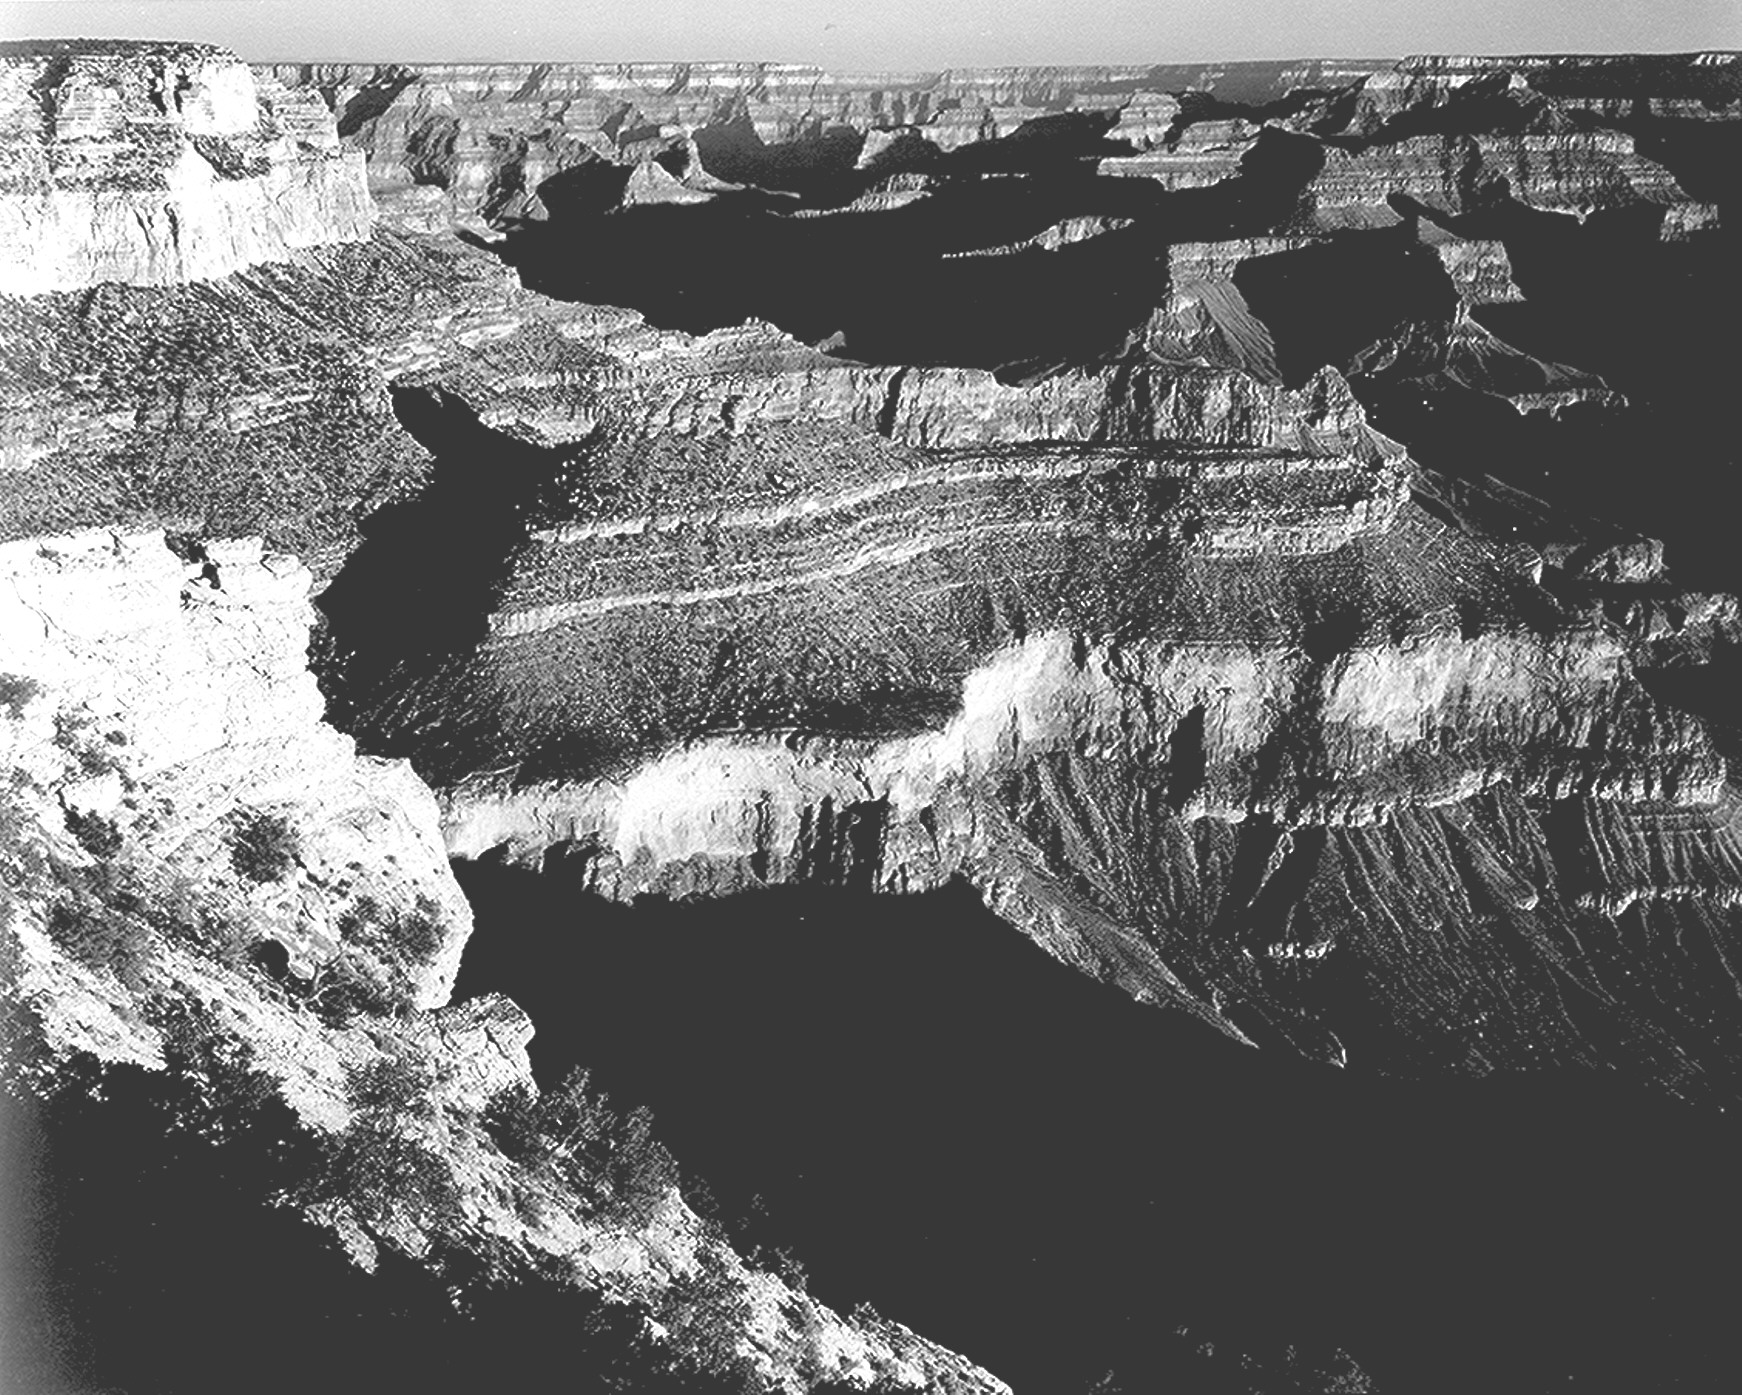 Details about   GRAND CANYON NATIONAL PARK ARIZO Ansel Adams Fine Art Giclee Reproduction 17x24 